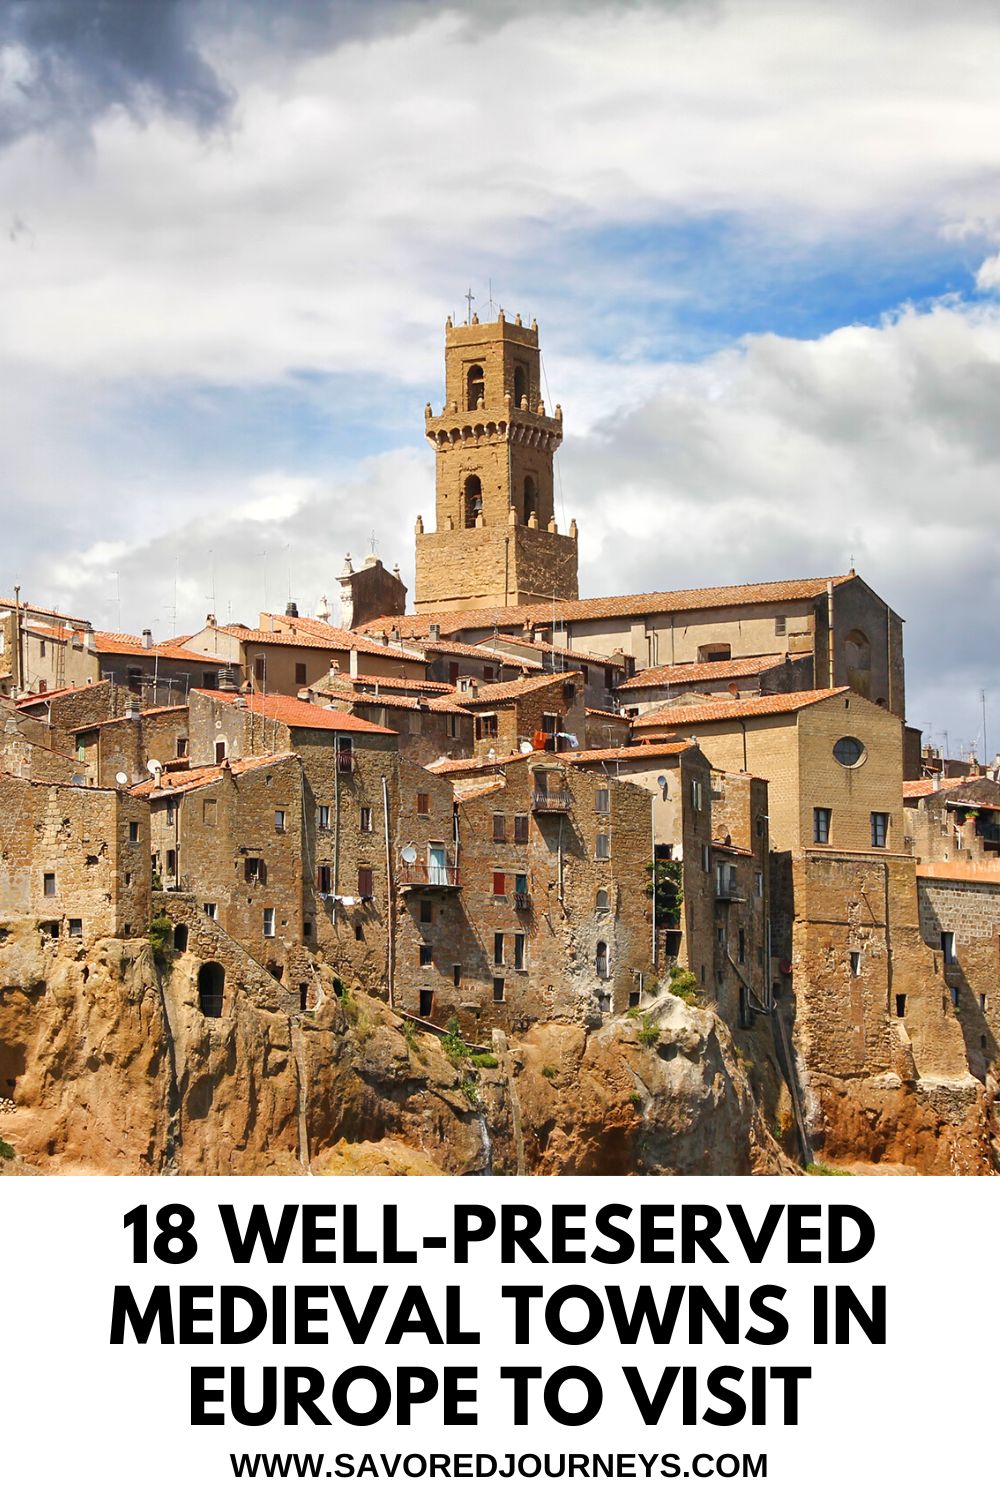 18 Medieval Towns in Europe to Visit